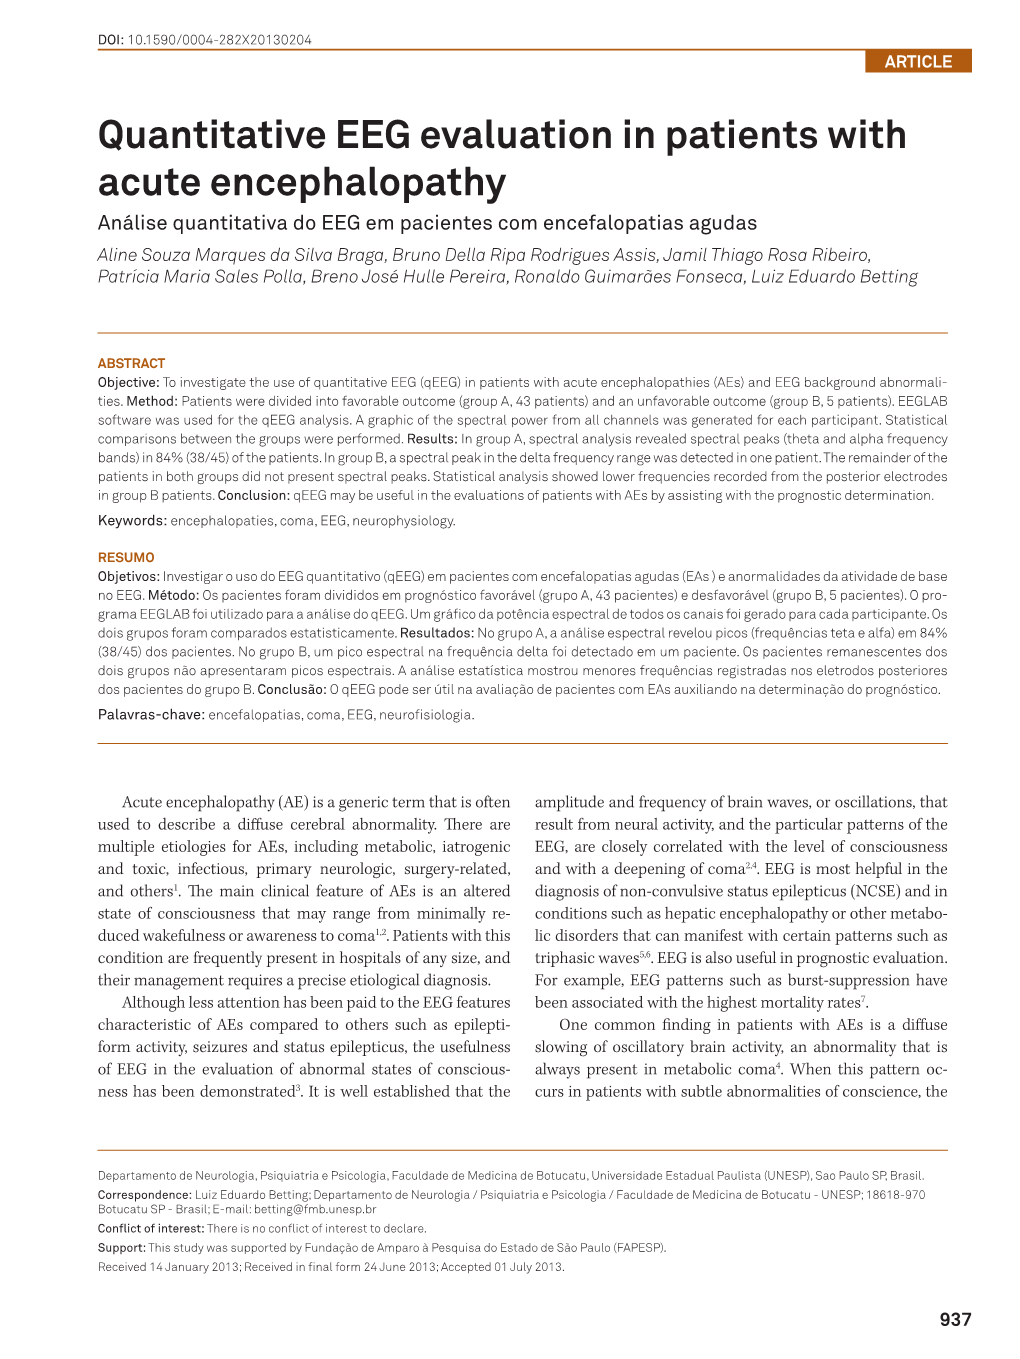 Quantitative EEG Evaluation in Patients with Acute Encephalopathy